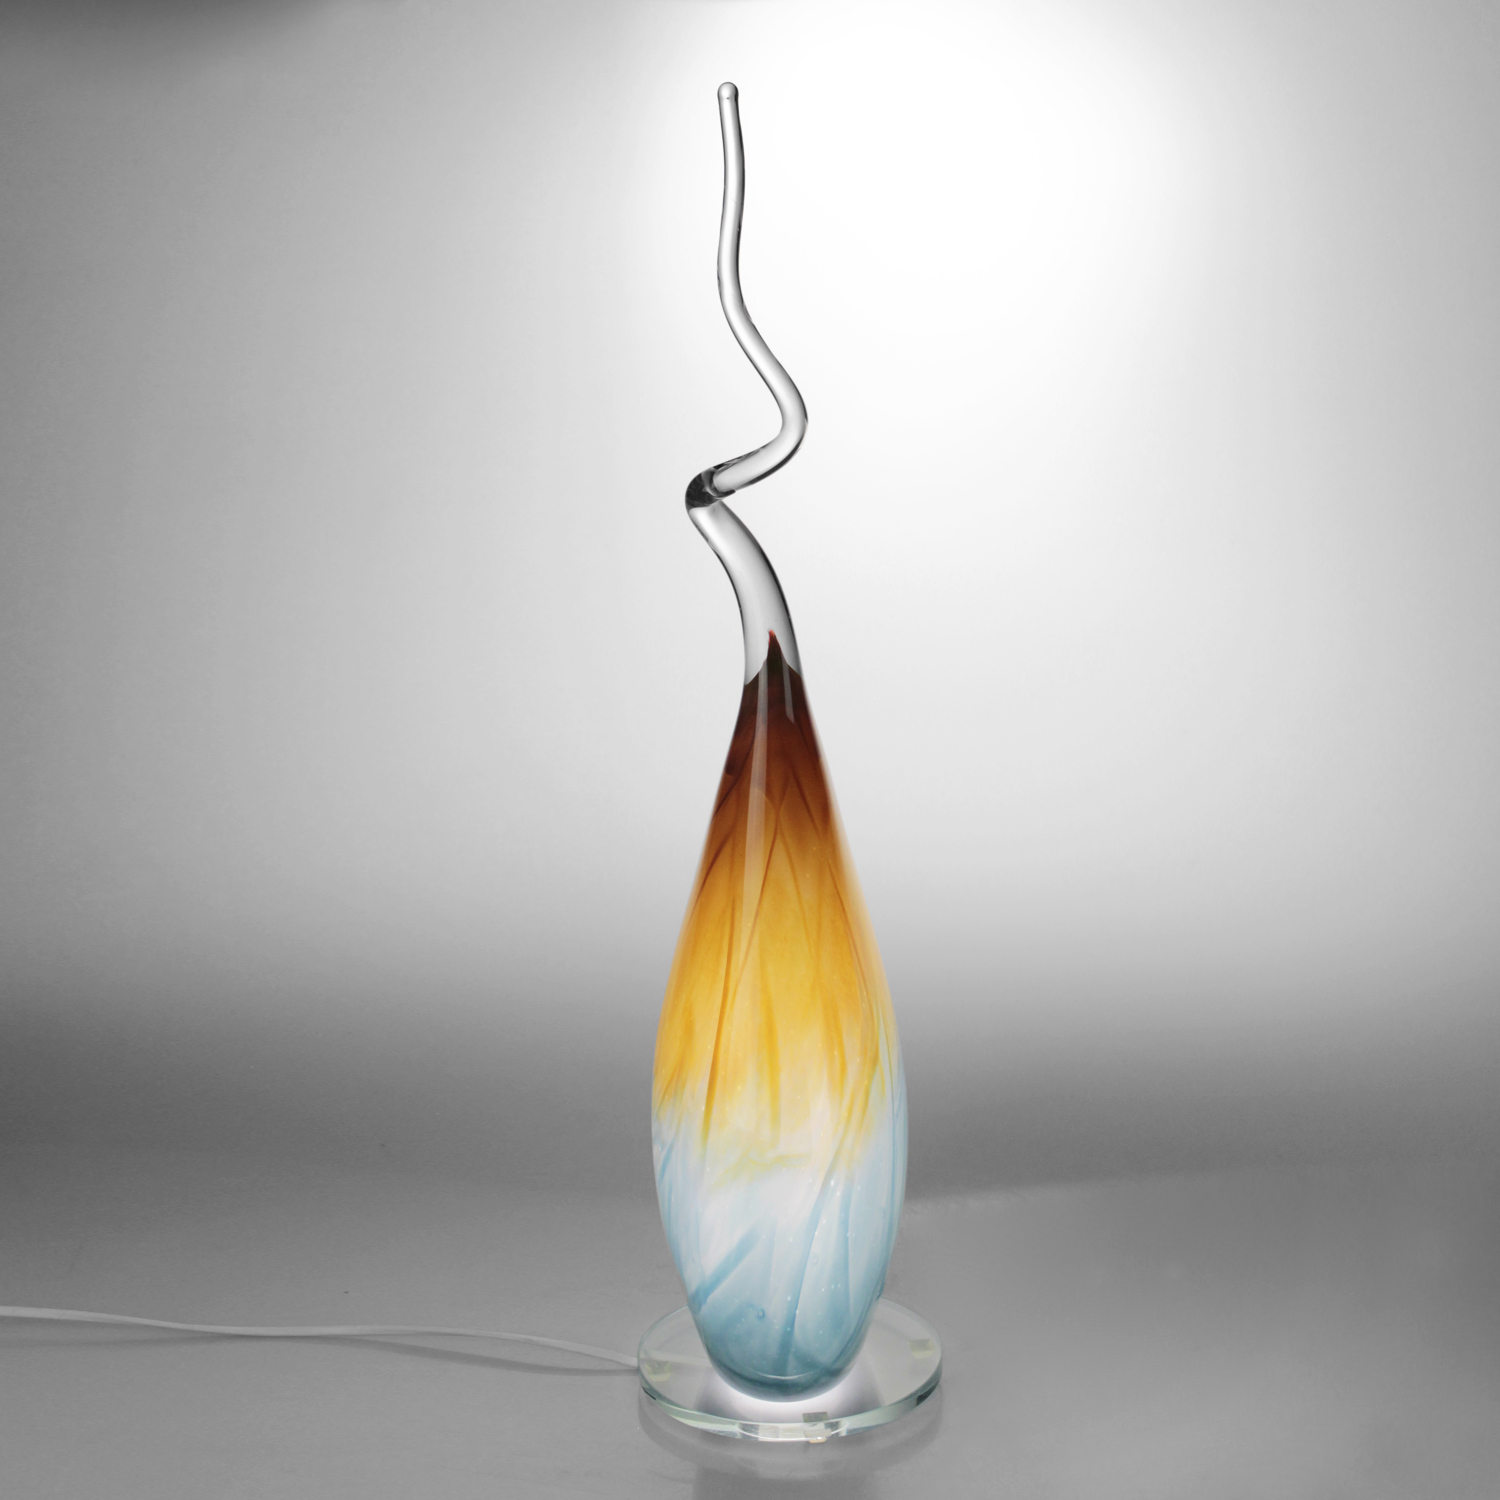 Lampe_flamme_ambre_turquoise_profil